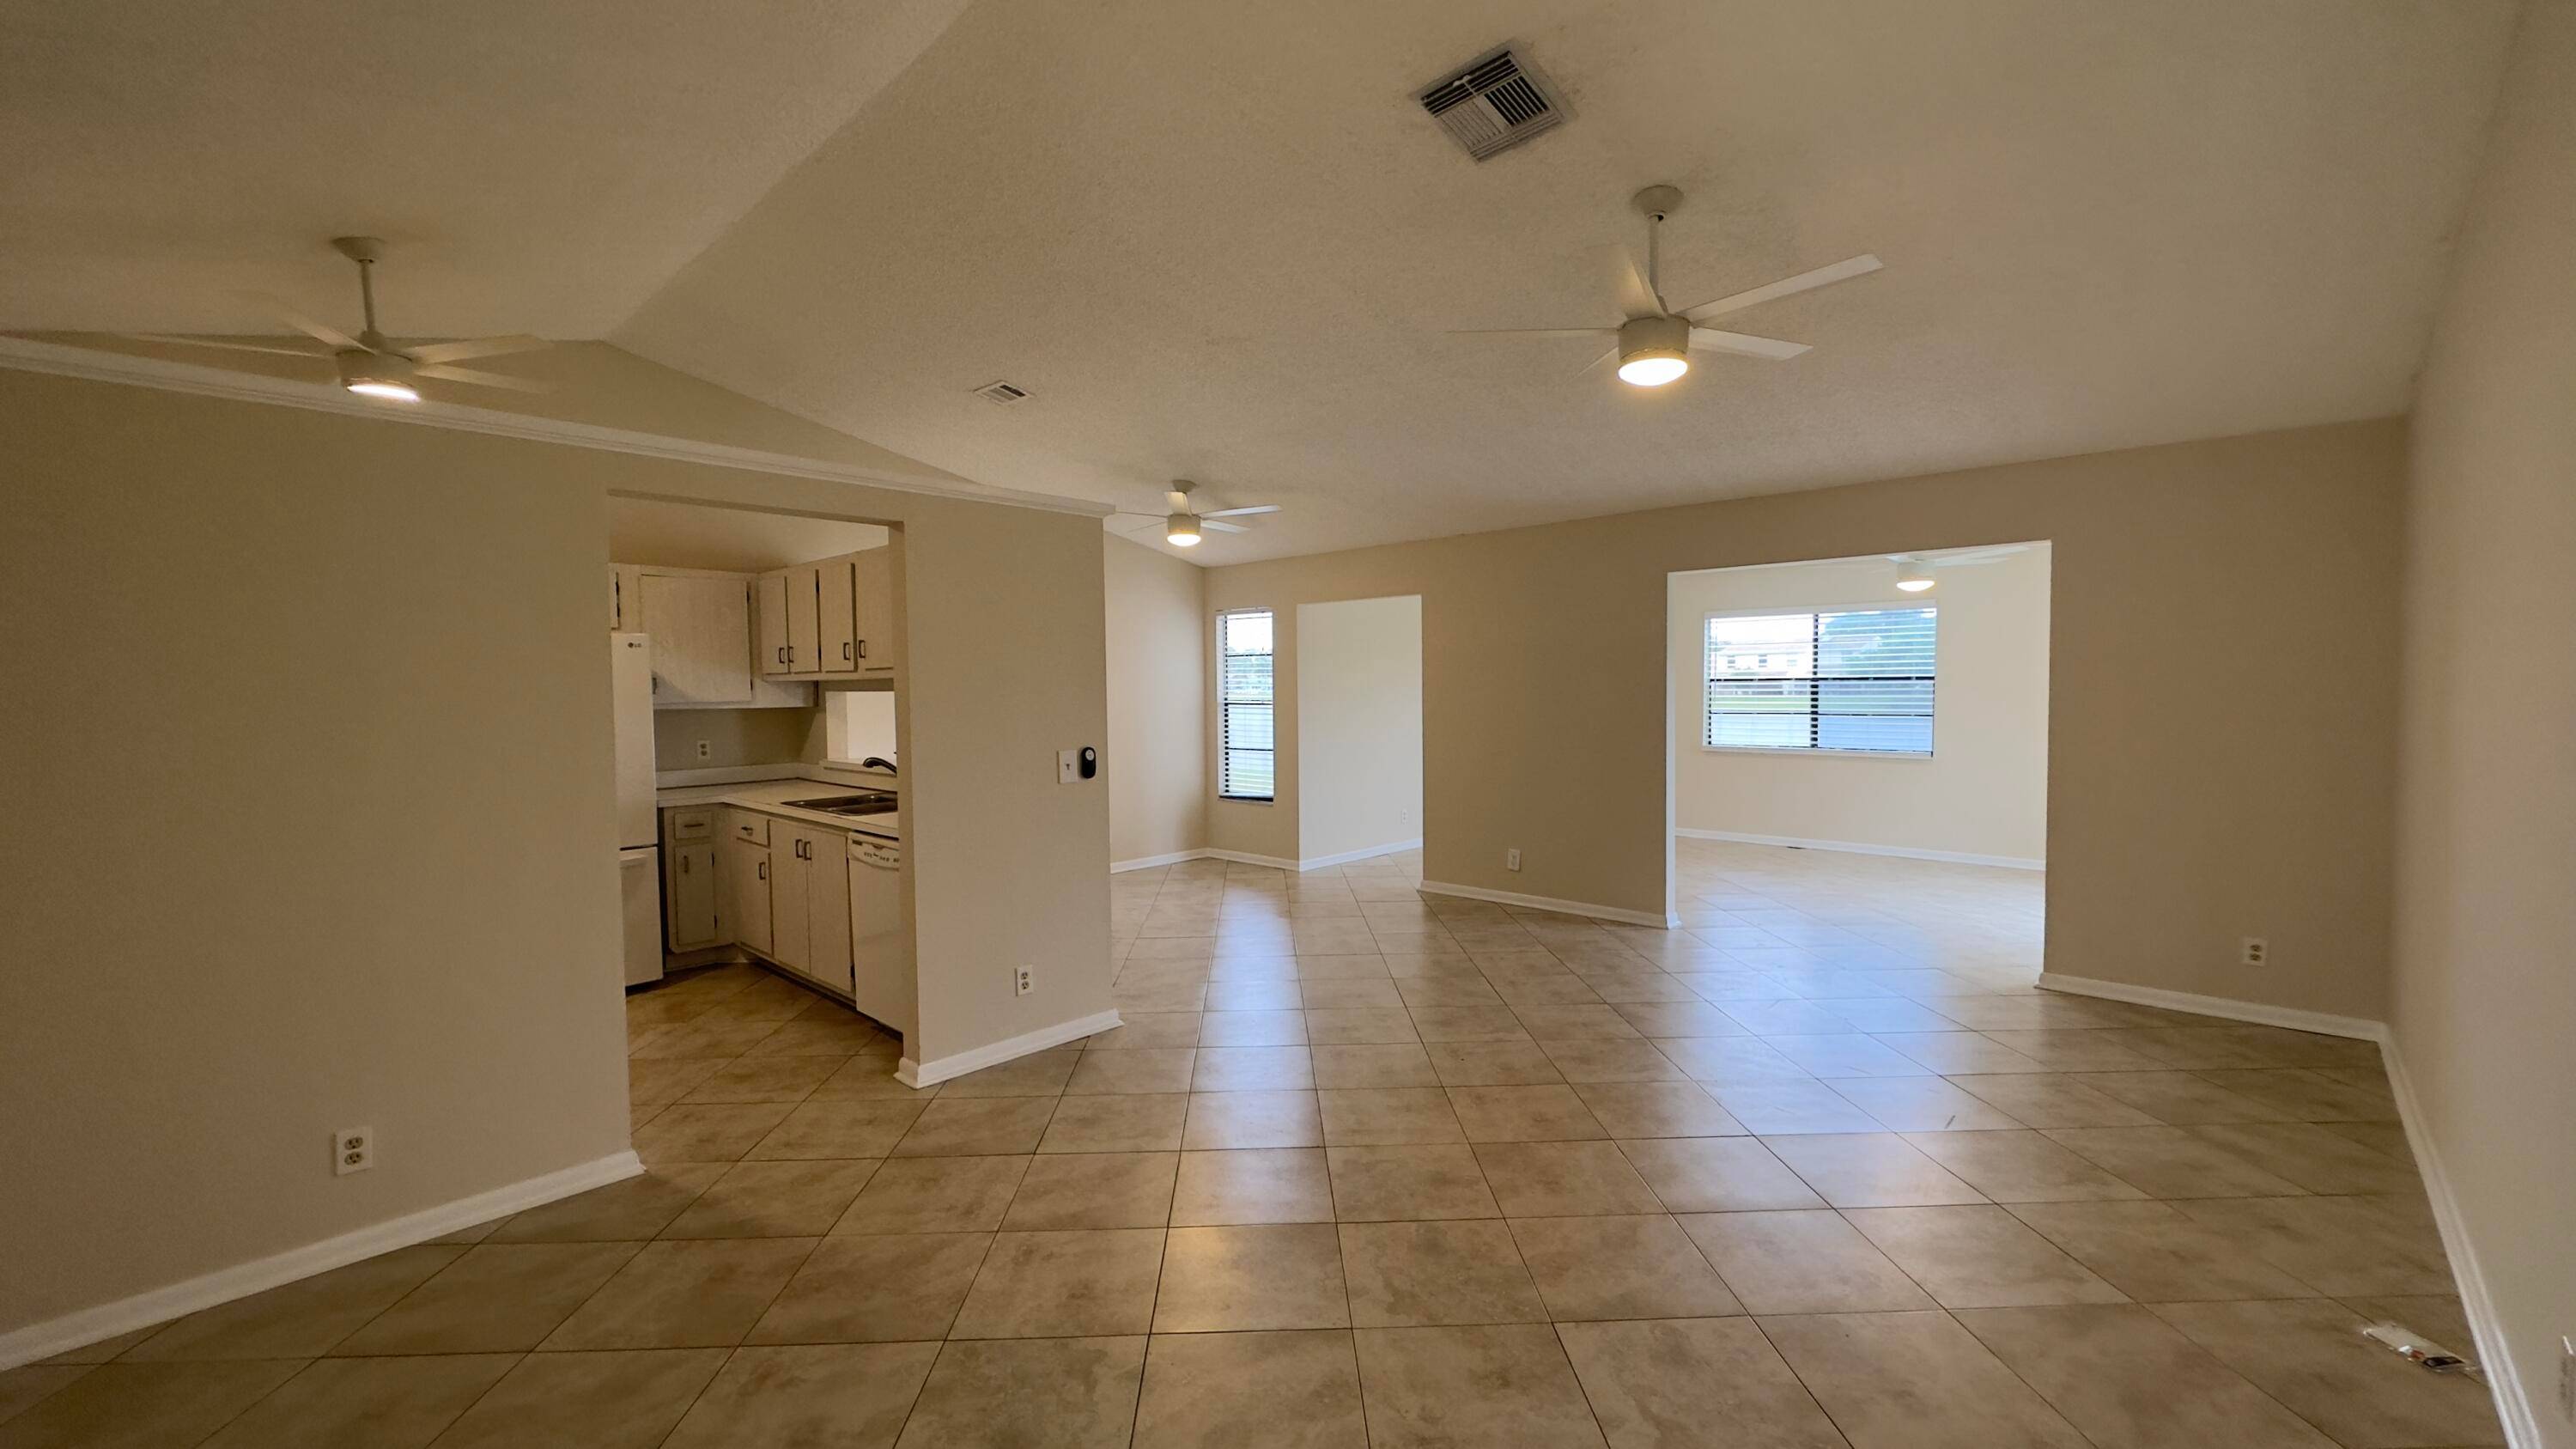 LOCATED IN JUPITER VILLAGE SINGLE FAMILY LAKEVIEW HOME LOCATED ON A CUL DE SAC OFFERS 1535 SQ FT THREE BEDROOMS TWO BATHS AND TWO CAR GARAGE.